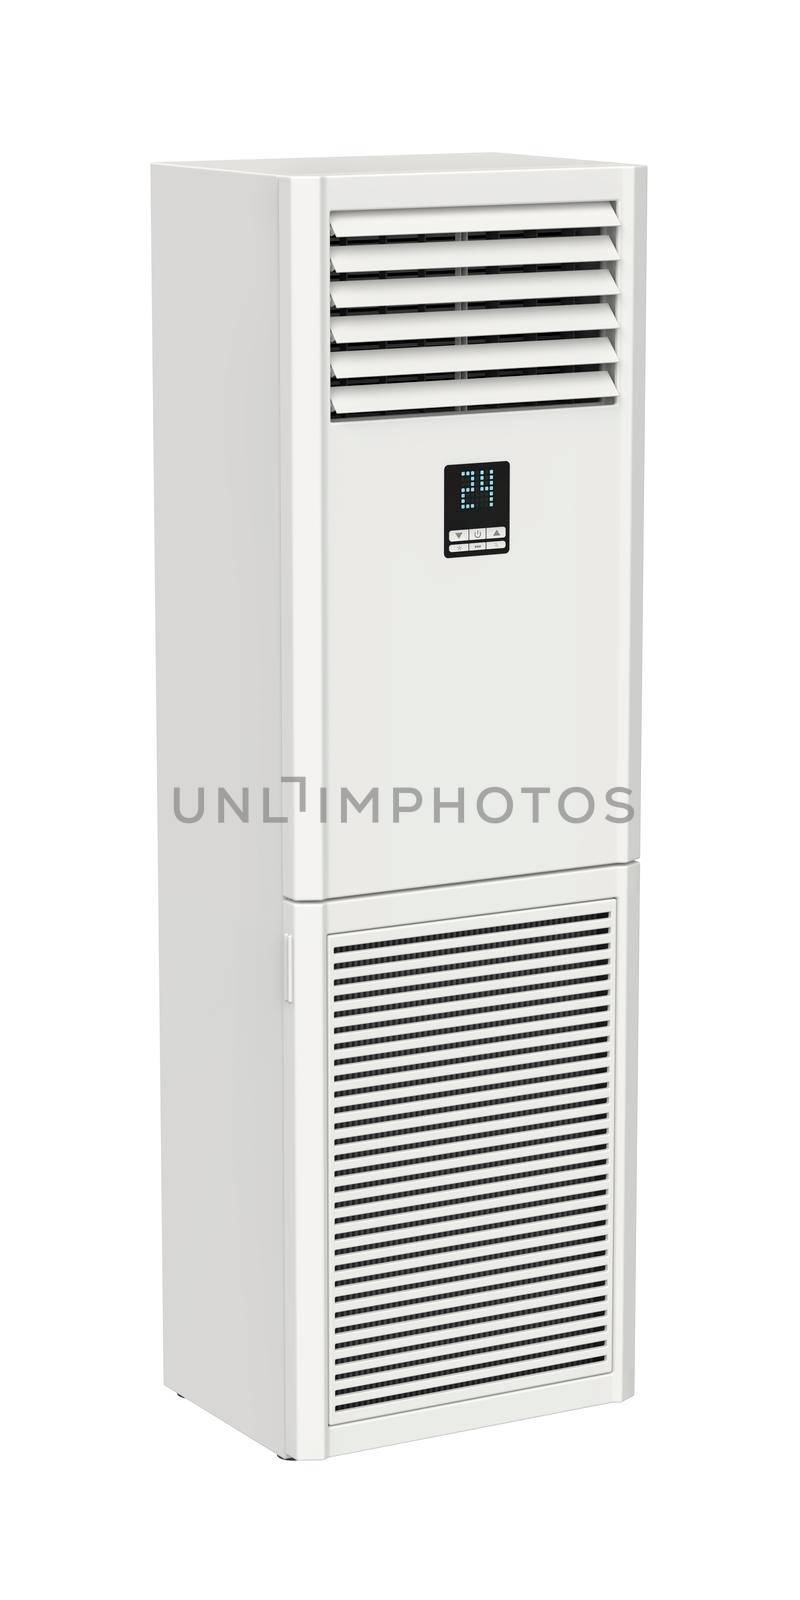 Big floor standing air conditioner isolated on white background